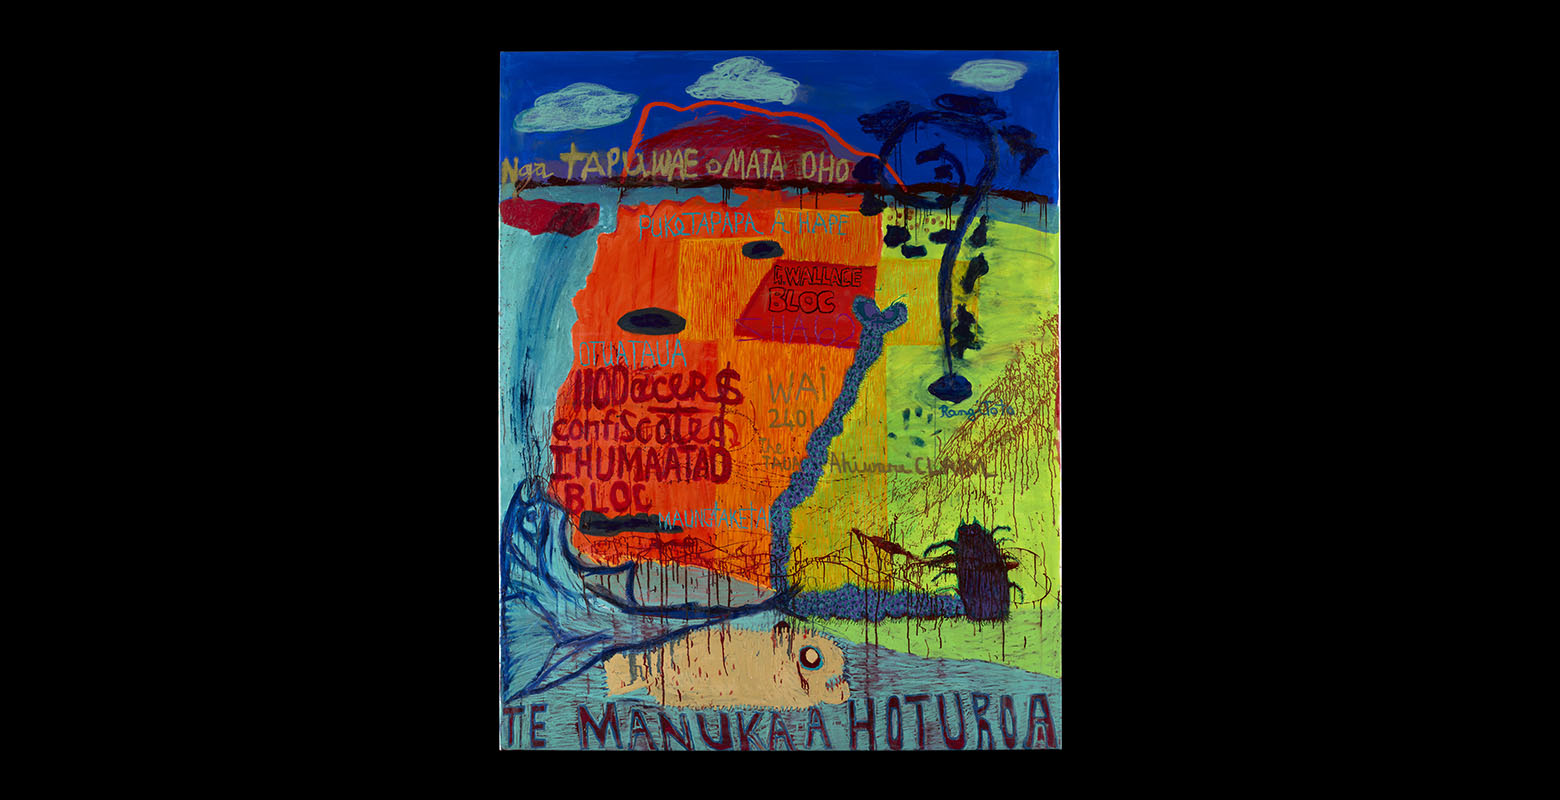 Mixed media abstract landscape painting: royal blue sky and clouds; red mountain; green and orange patchwork land with koru-shaped tree; blue sea with a cream, sea-like creature. Words, phrases and unidentified shapes are painted across the canvas.